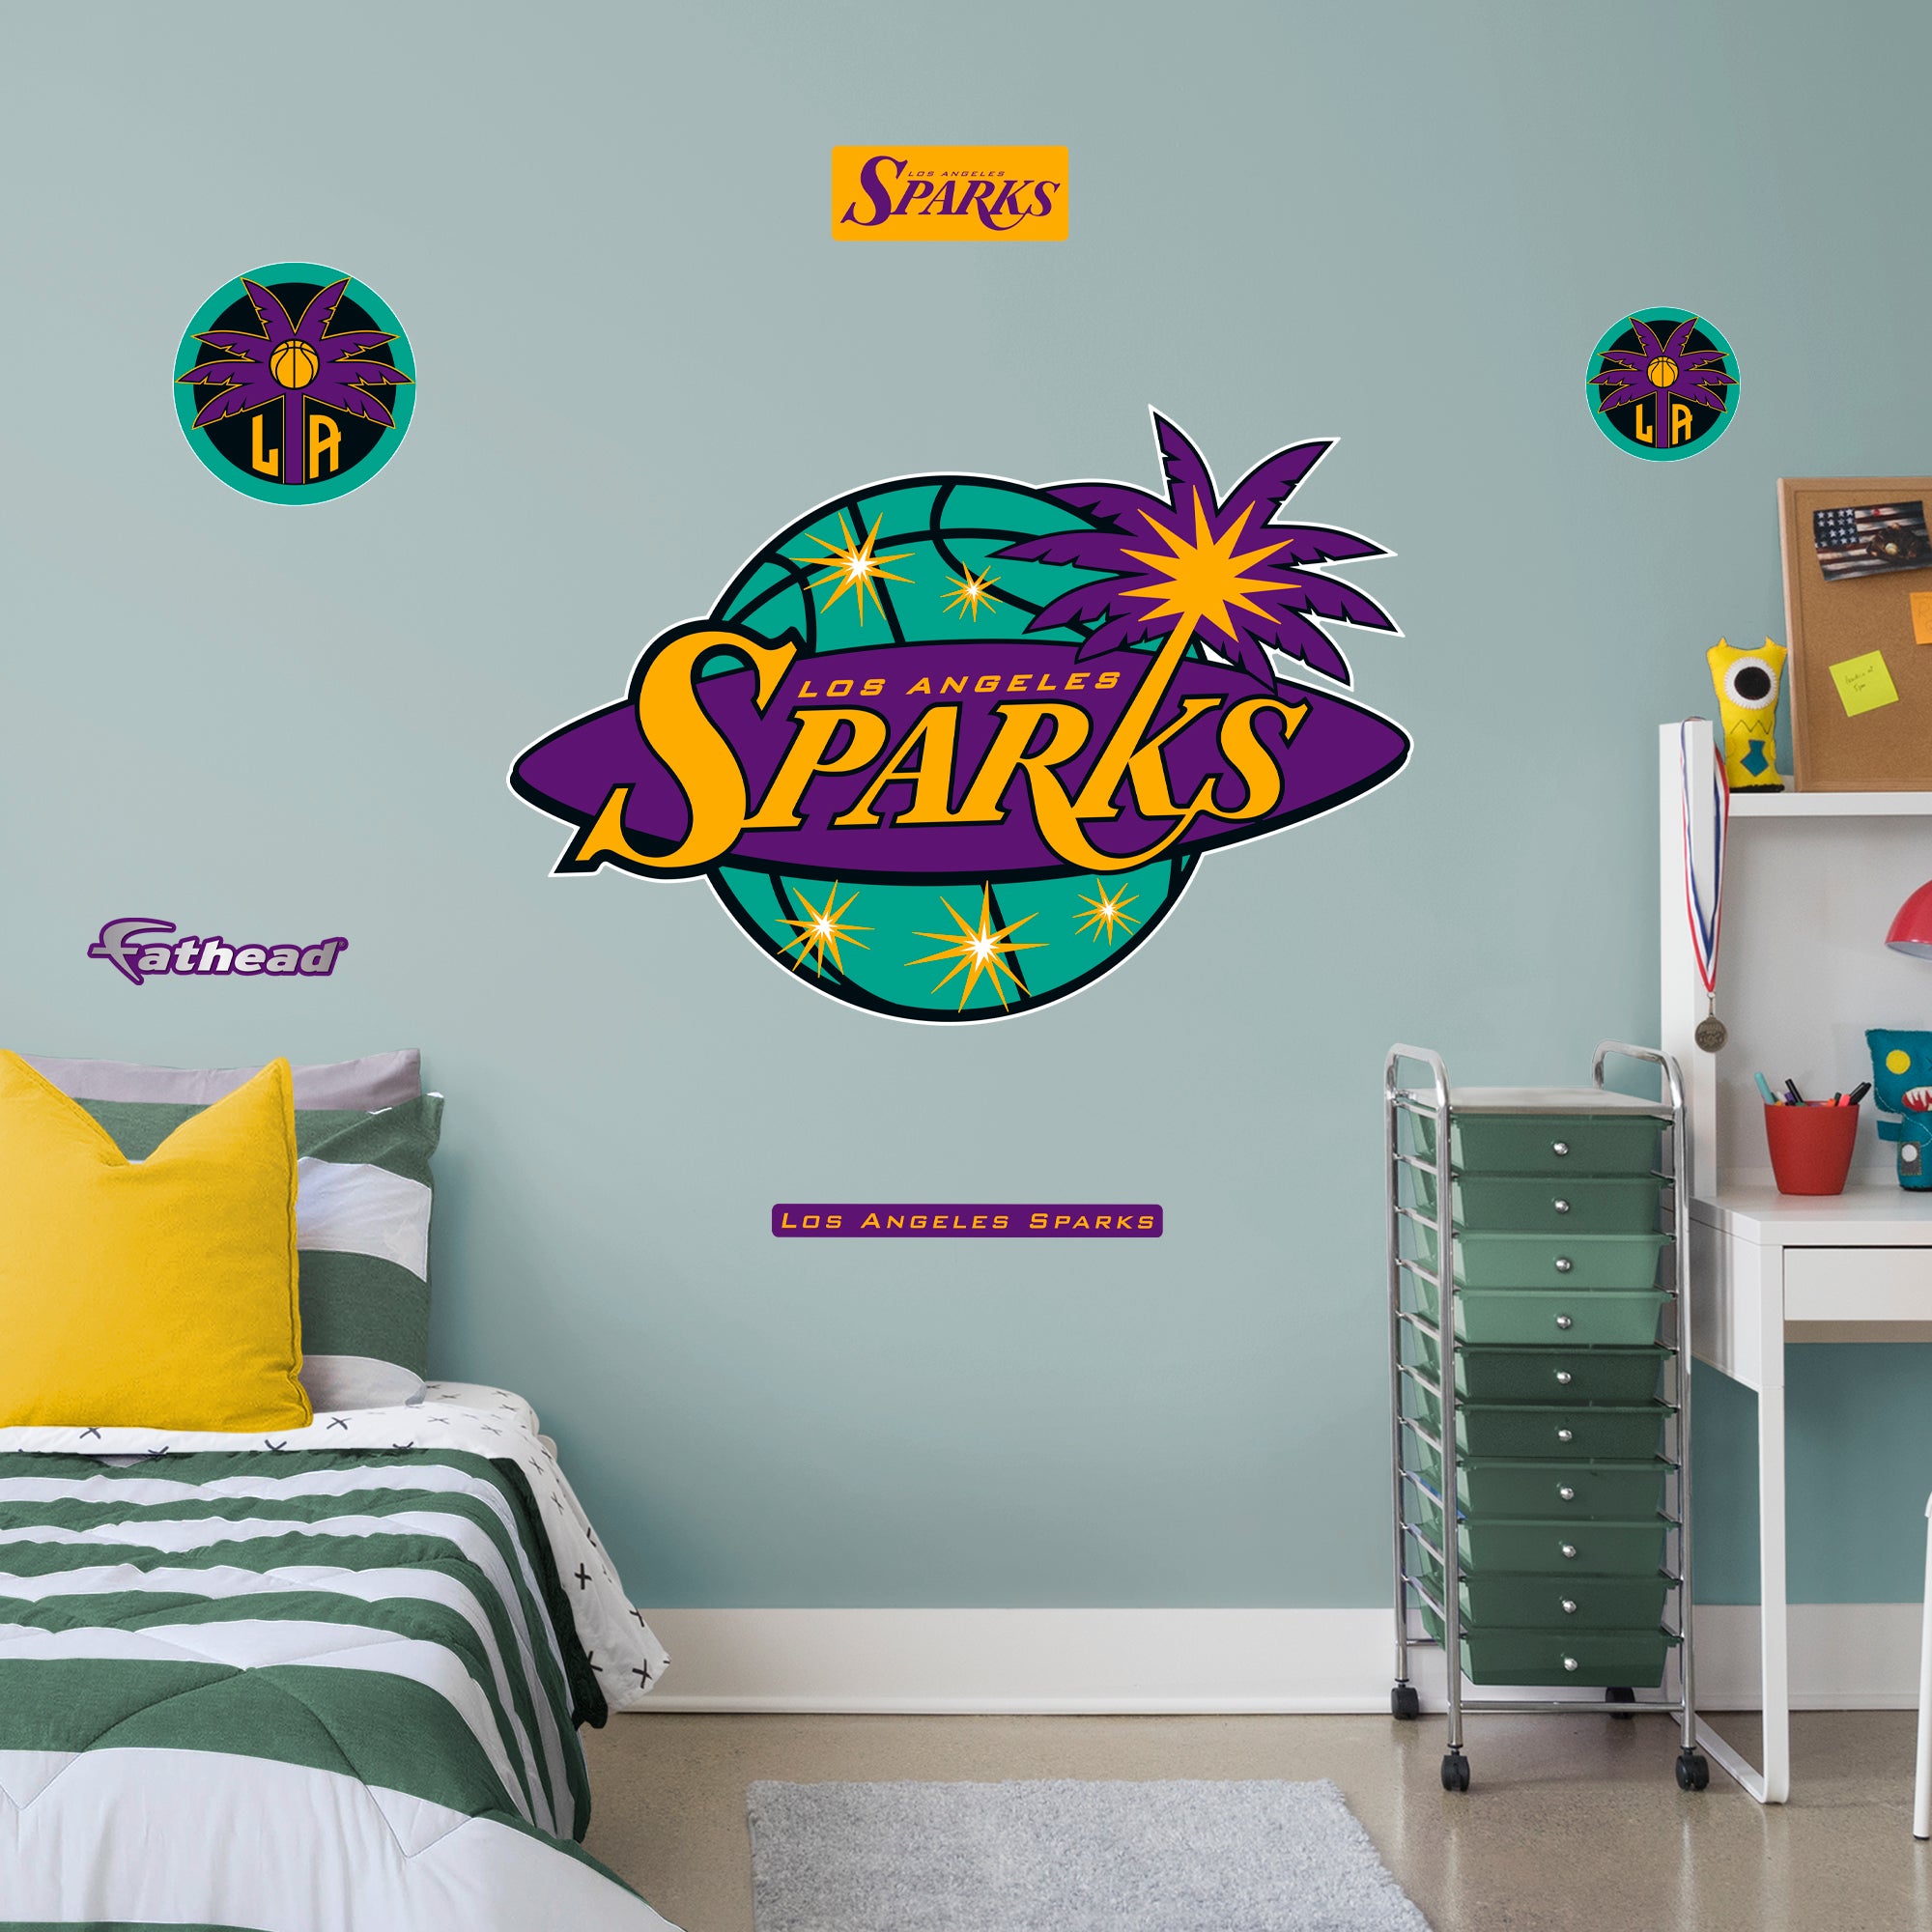 Los Angeles Sparks: Logo - Officially Licensed WNBA Removable Wall Decal Giant + 5 Decals by Fathead | Vinyl